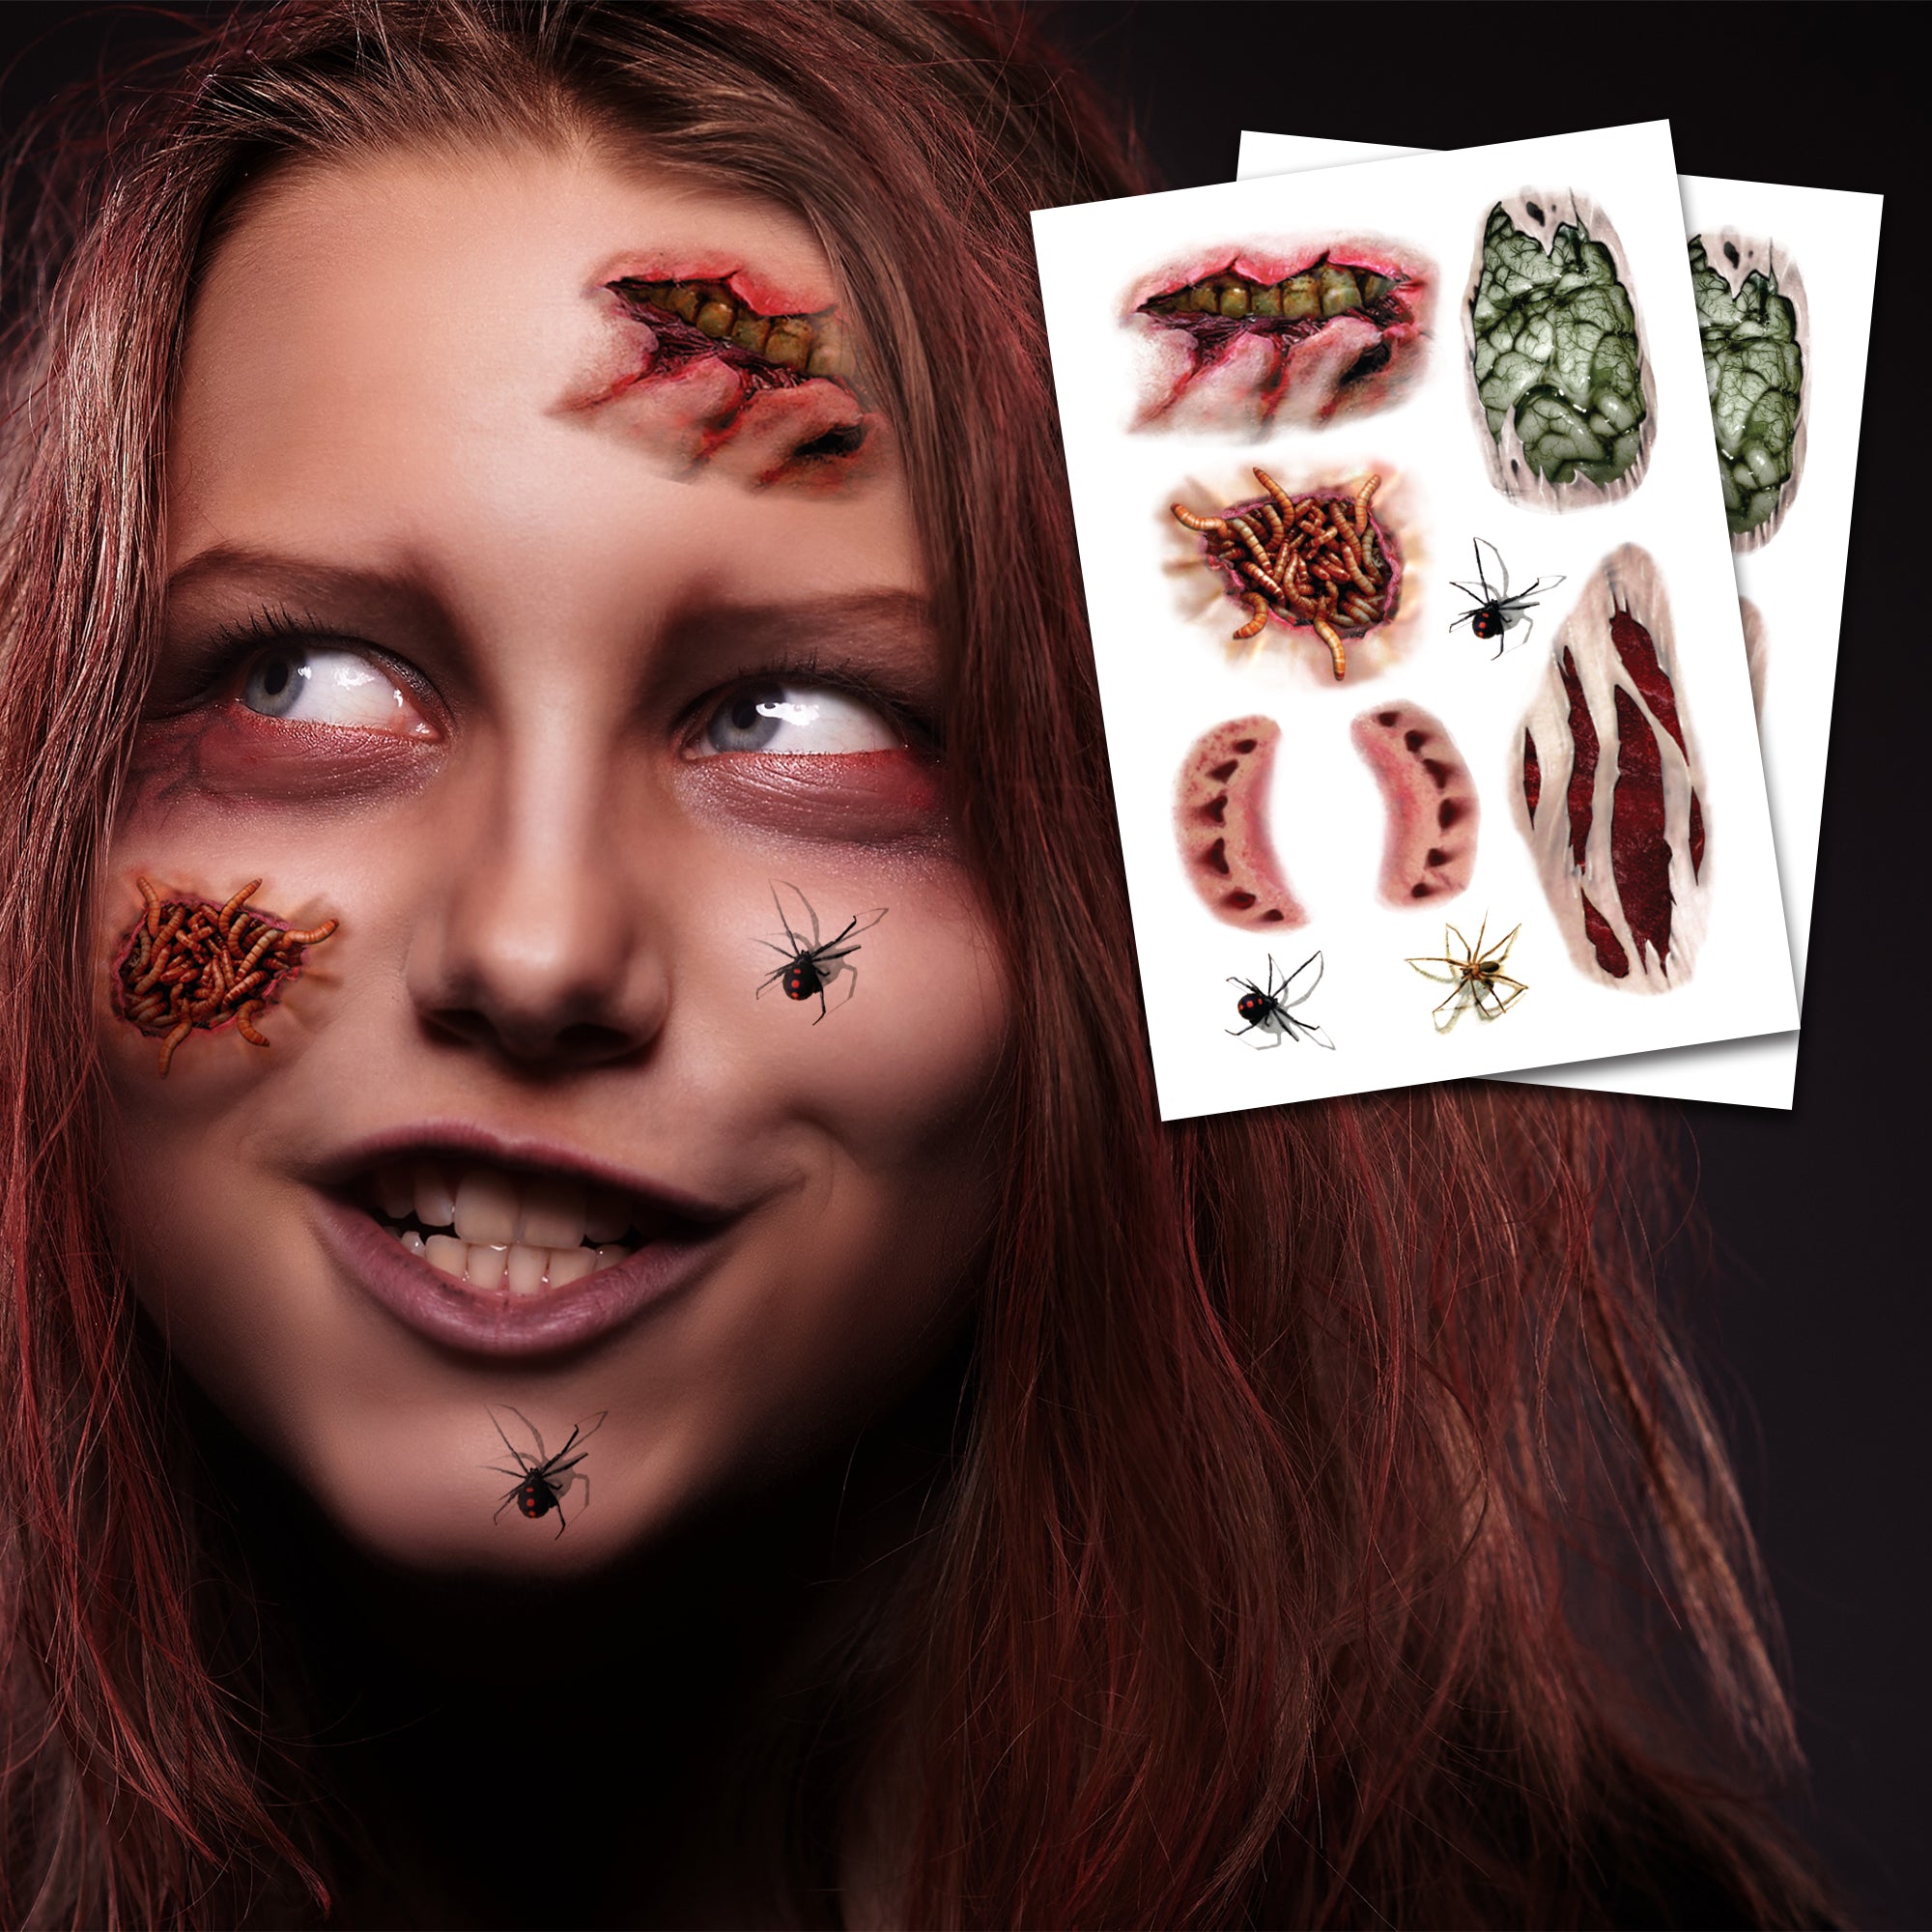 Zombie Temporary Tattoos | Pack of 2 | Halloween Costume Tattoo Kit | Skin-Safe | MADE IN USA | Removable